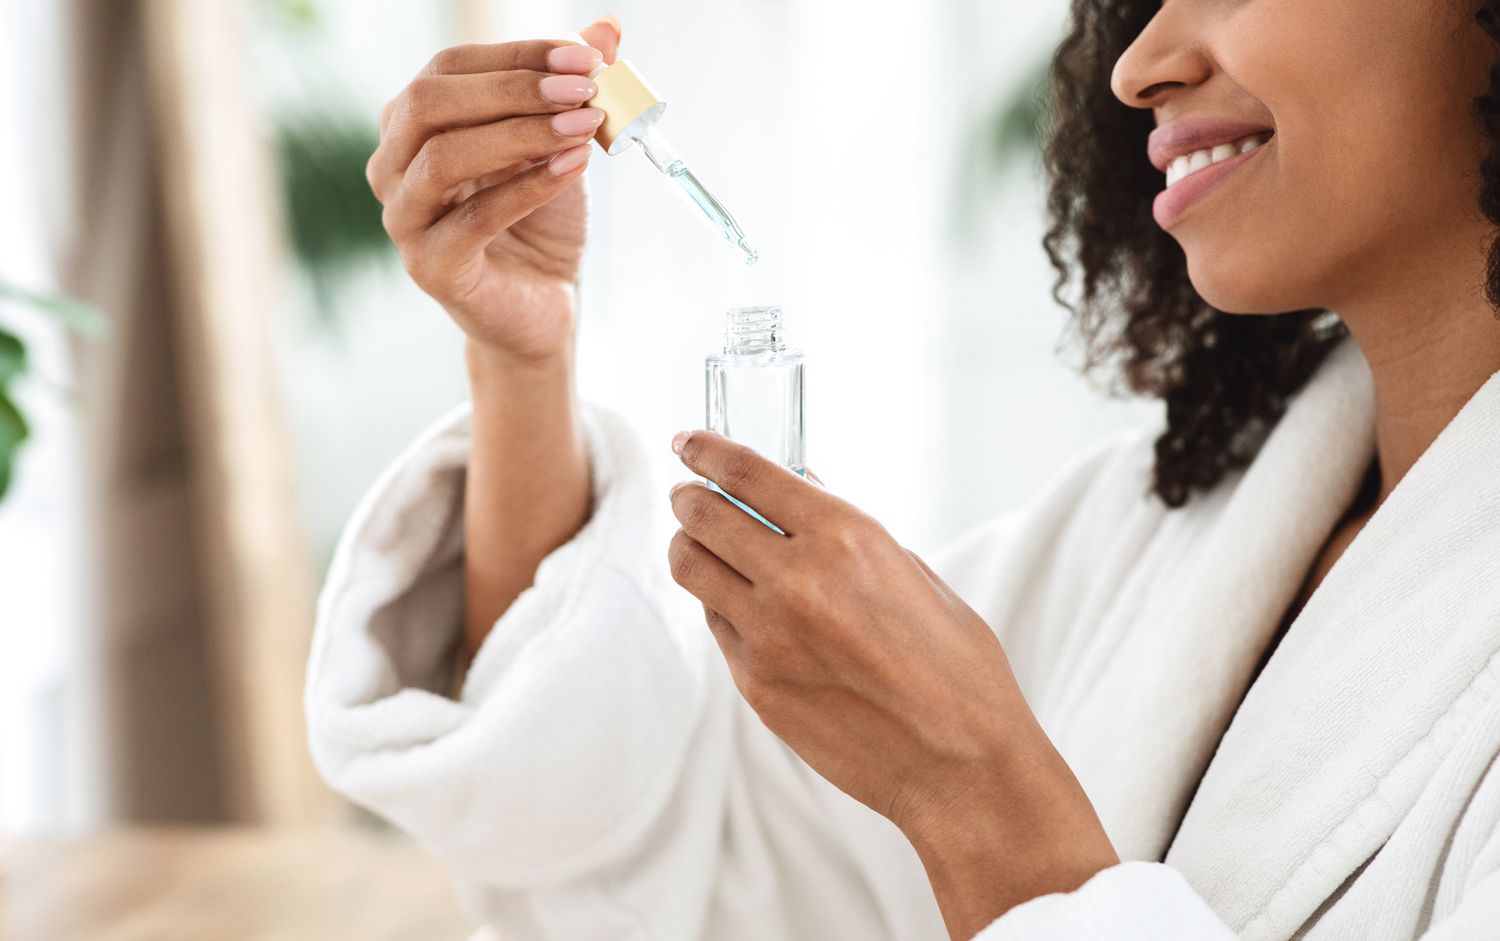 African American woman with serum vial in white robe